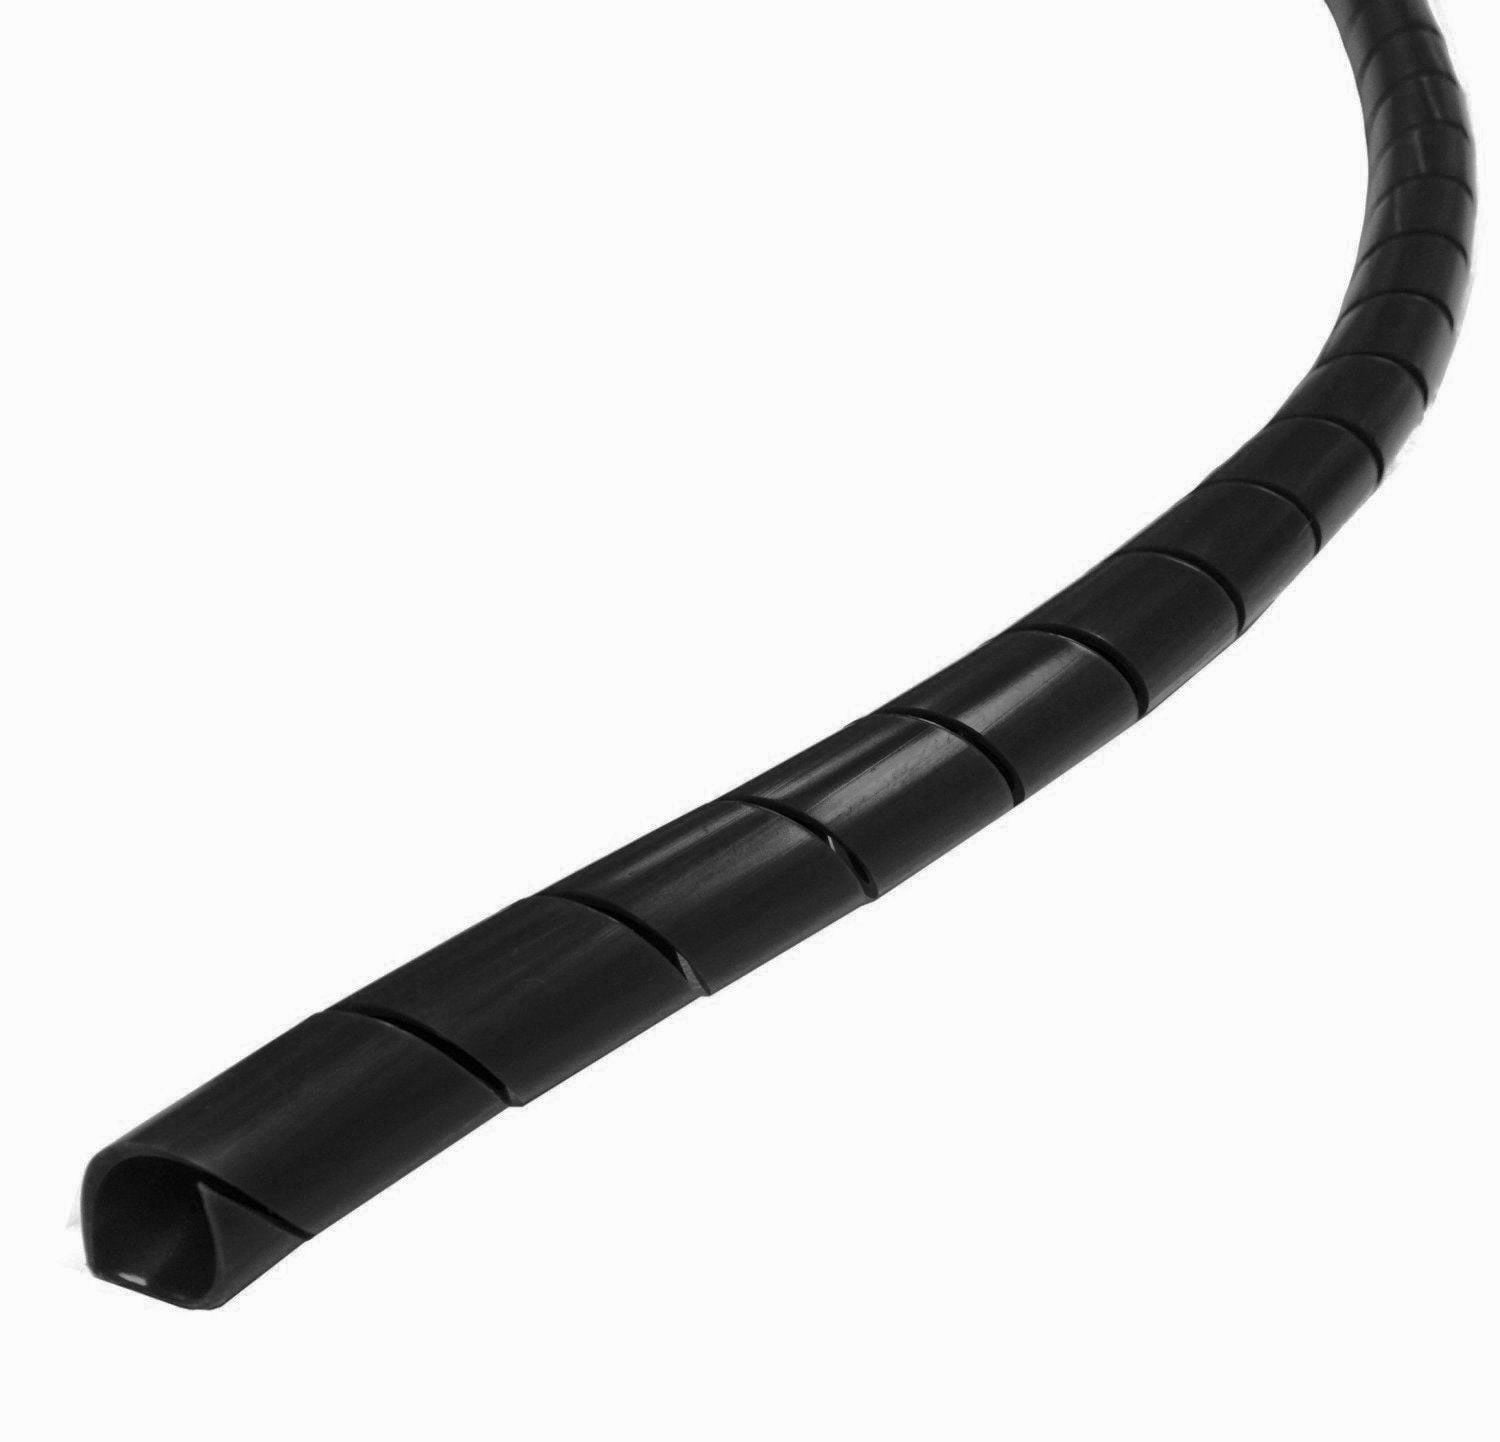 uxcell 12mmx5.5m Spiral Cable Wire Wrap Tube Computer Management Cord Black